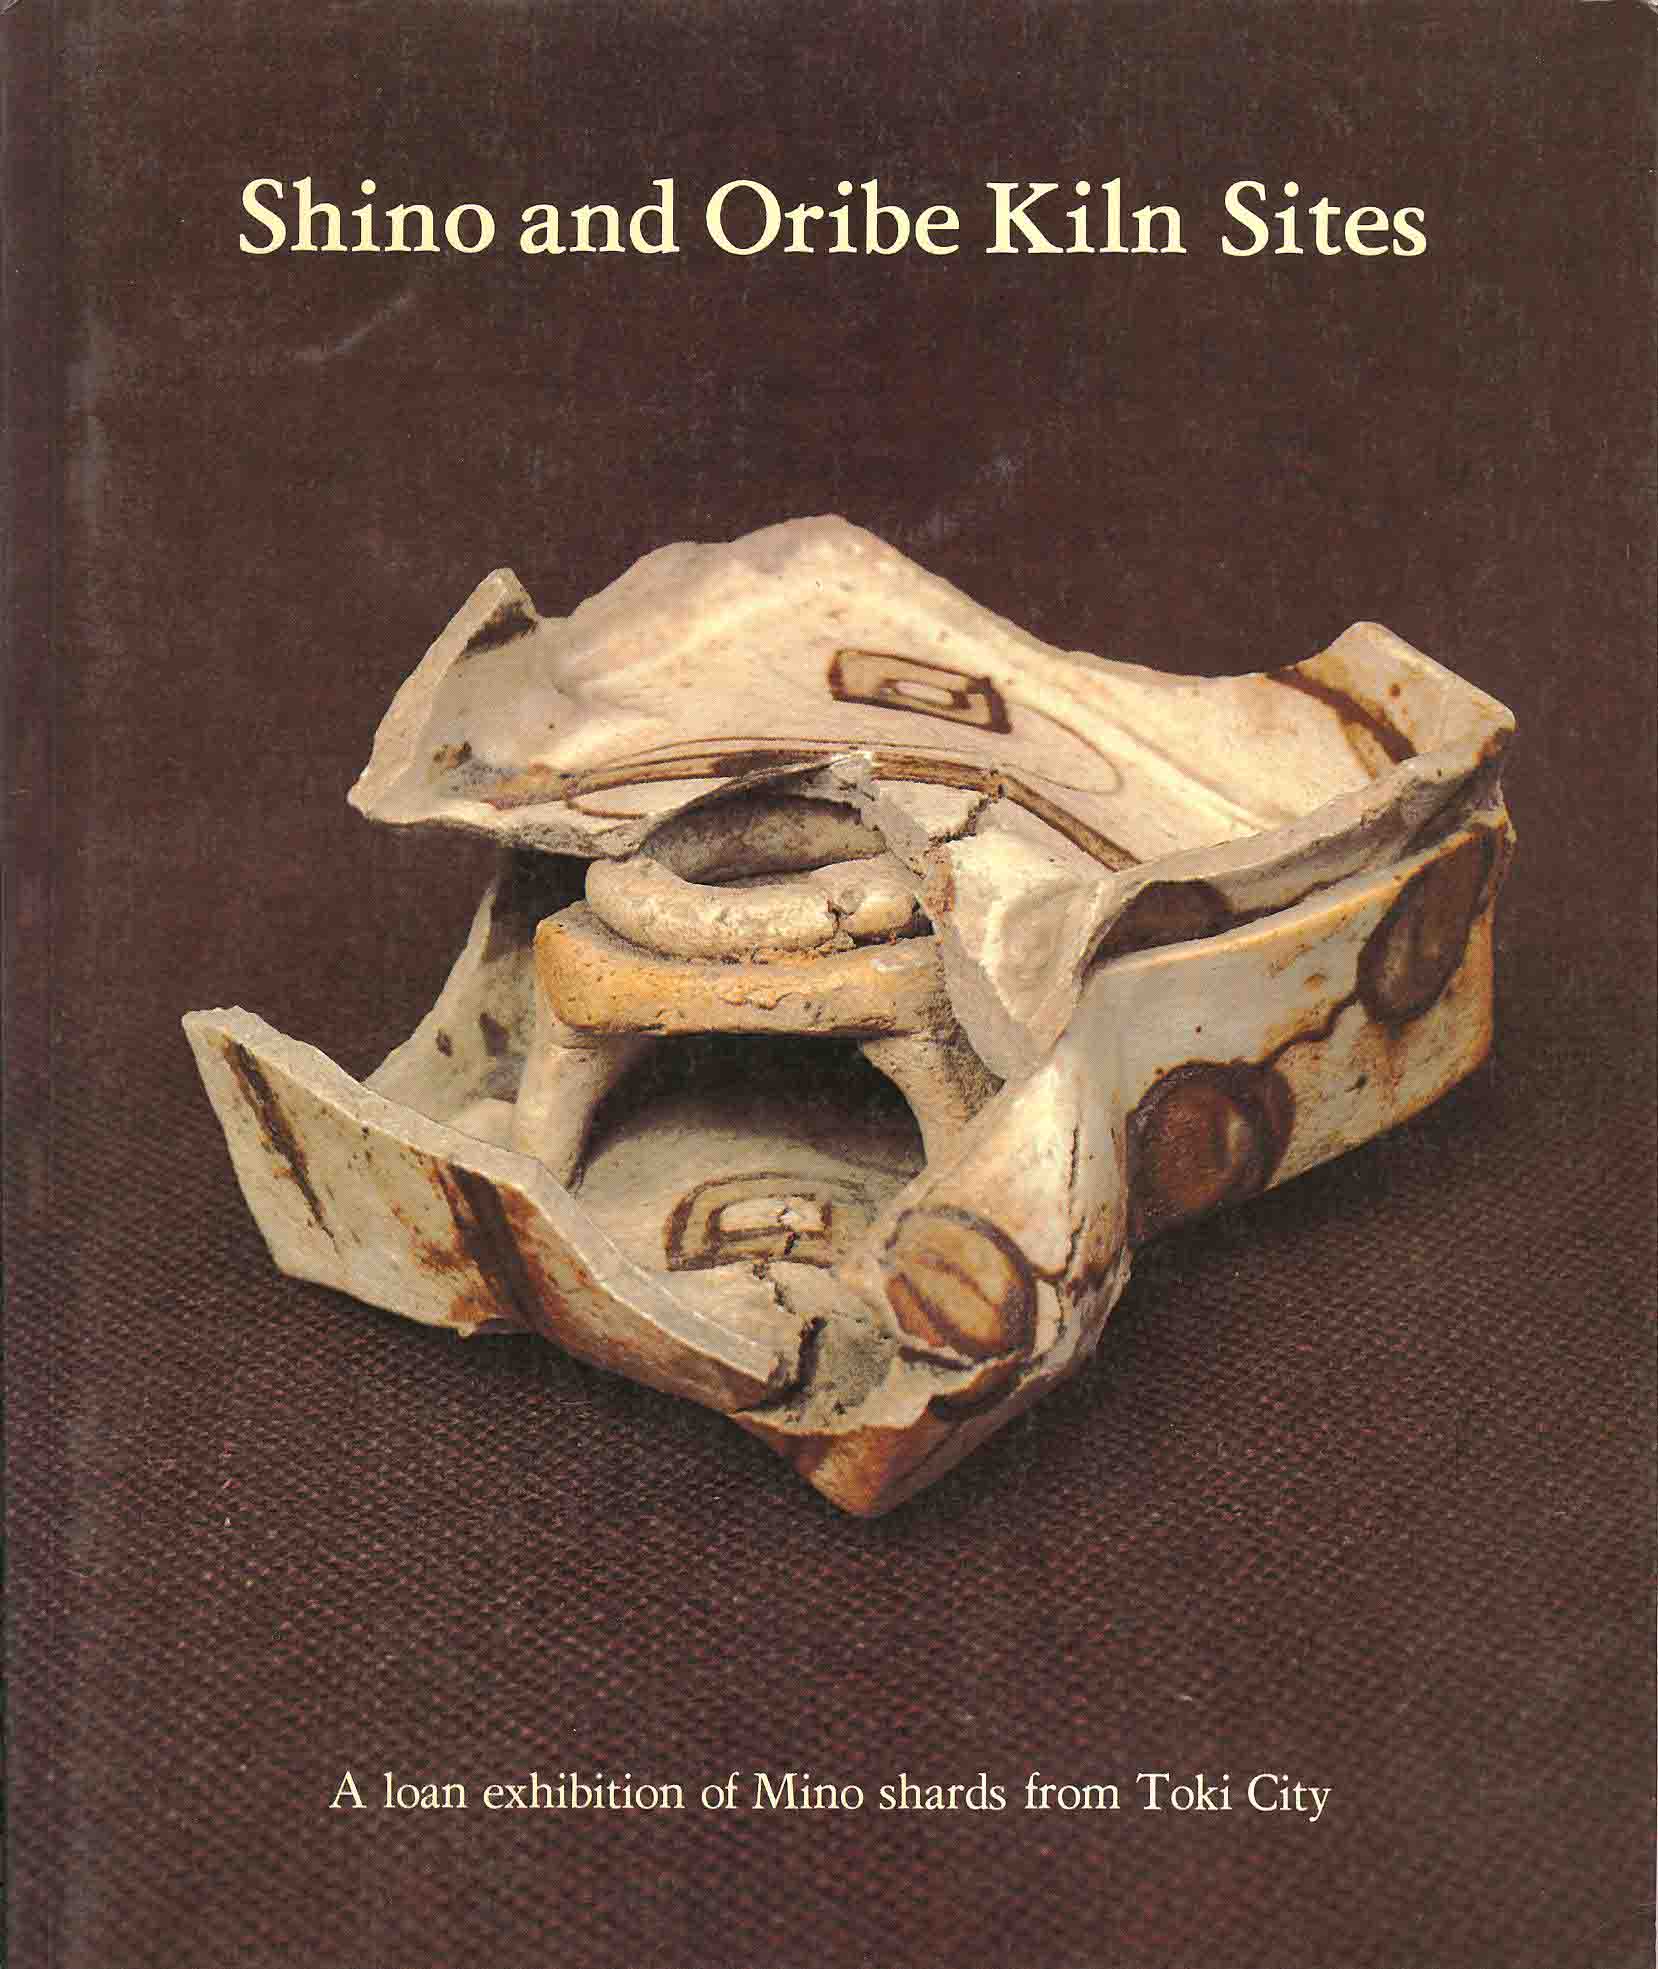 Faulkner, R. F. J. & Impey, O. R - Shino and Oribe Kiln Sites - A Loan Exhibition of Mino Shards from Toki City.